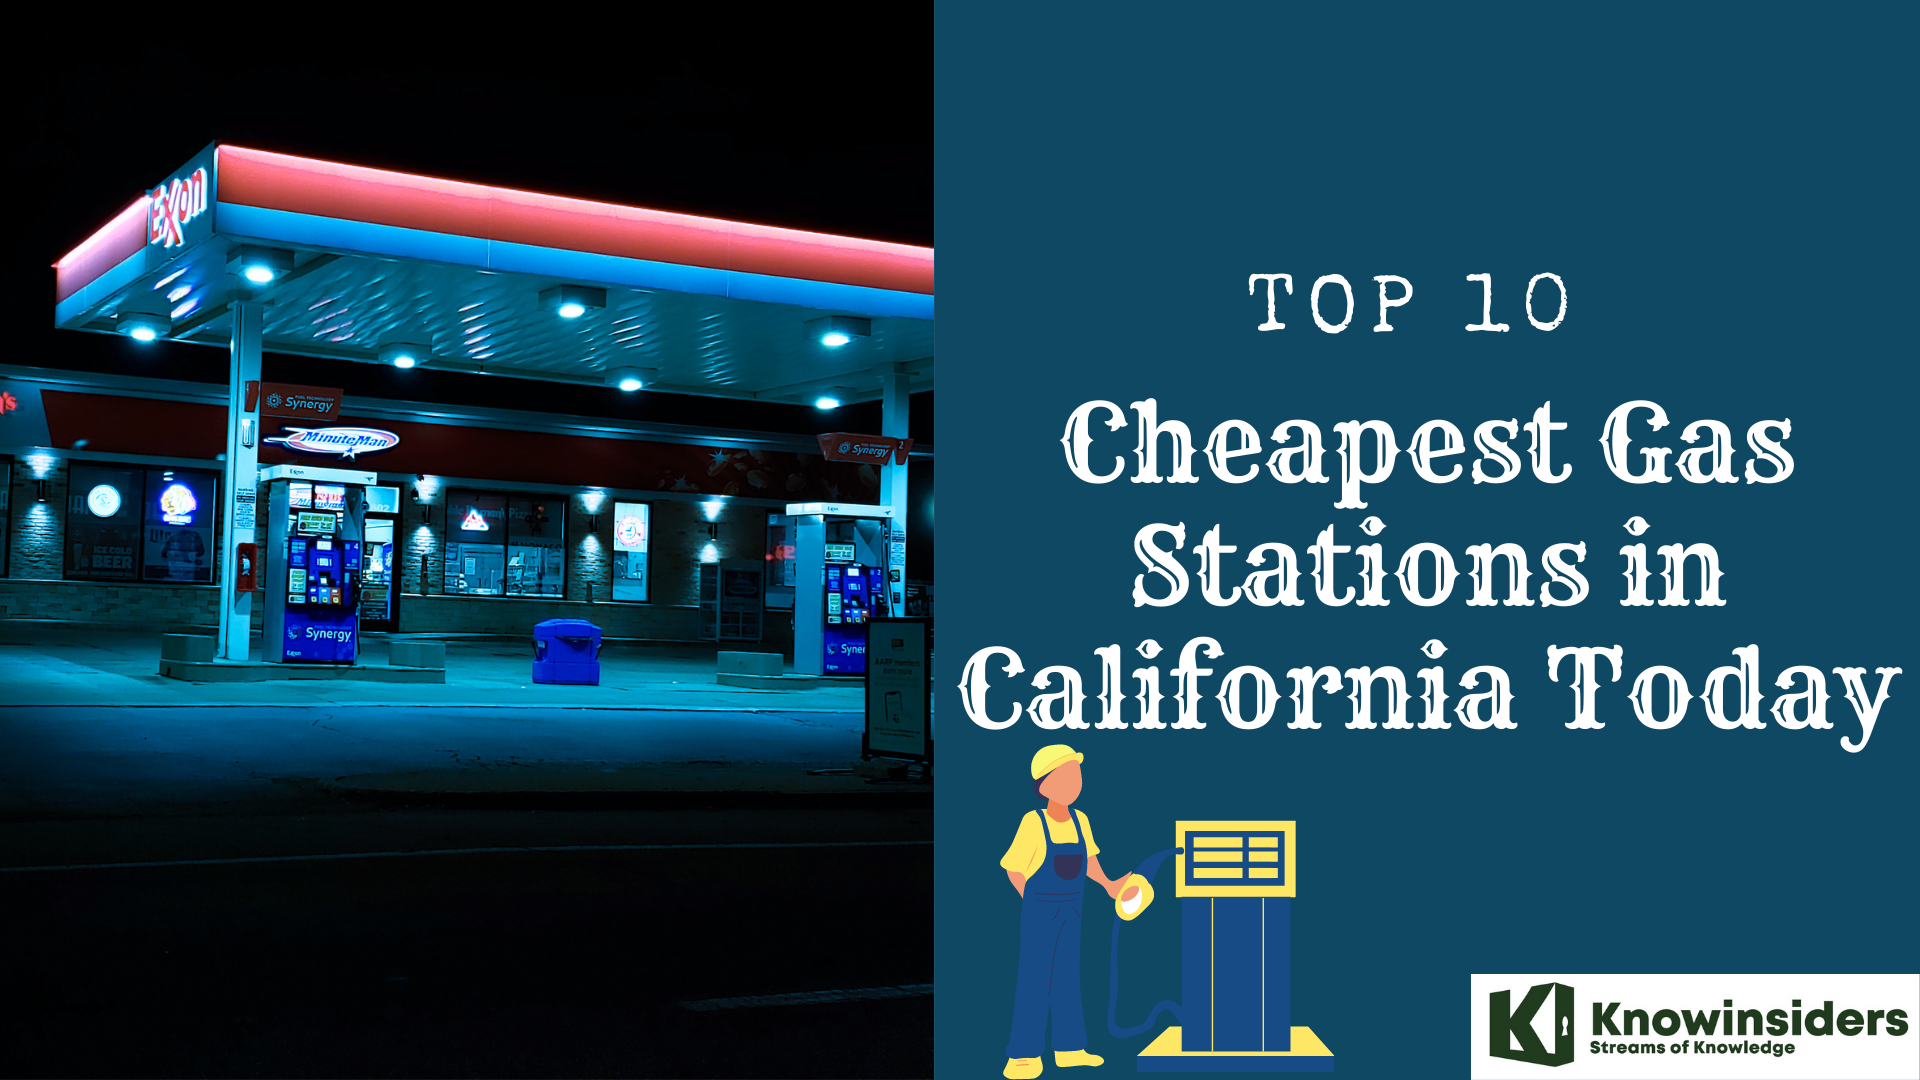 top 10 cheapest gas stations in california you keep in mind